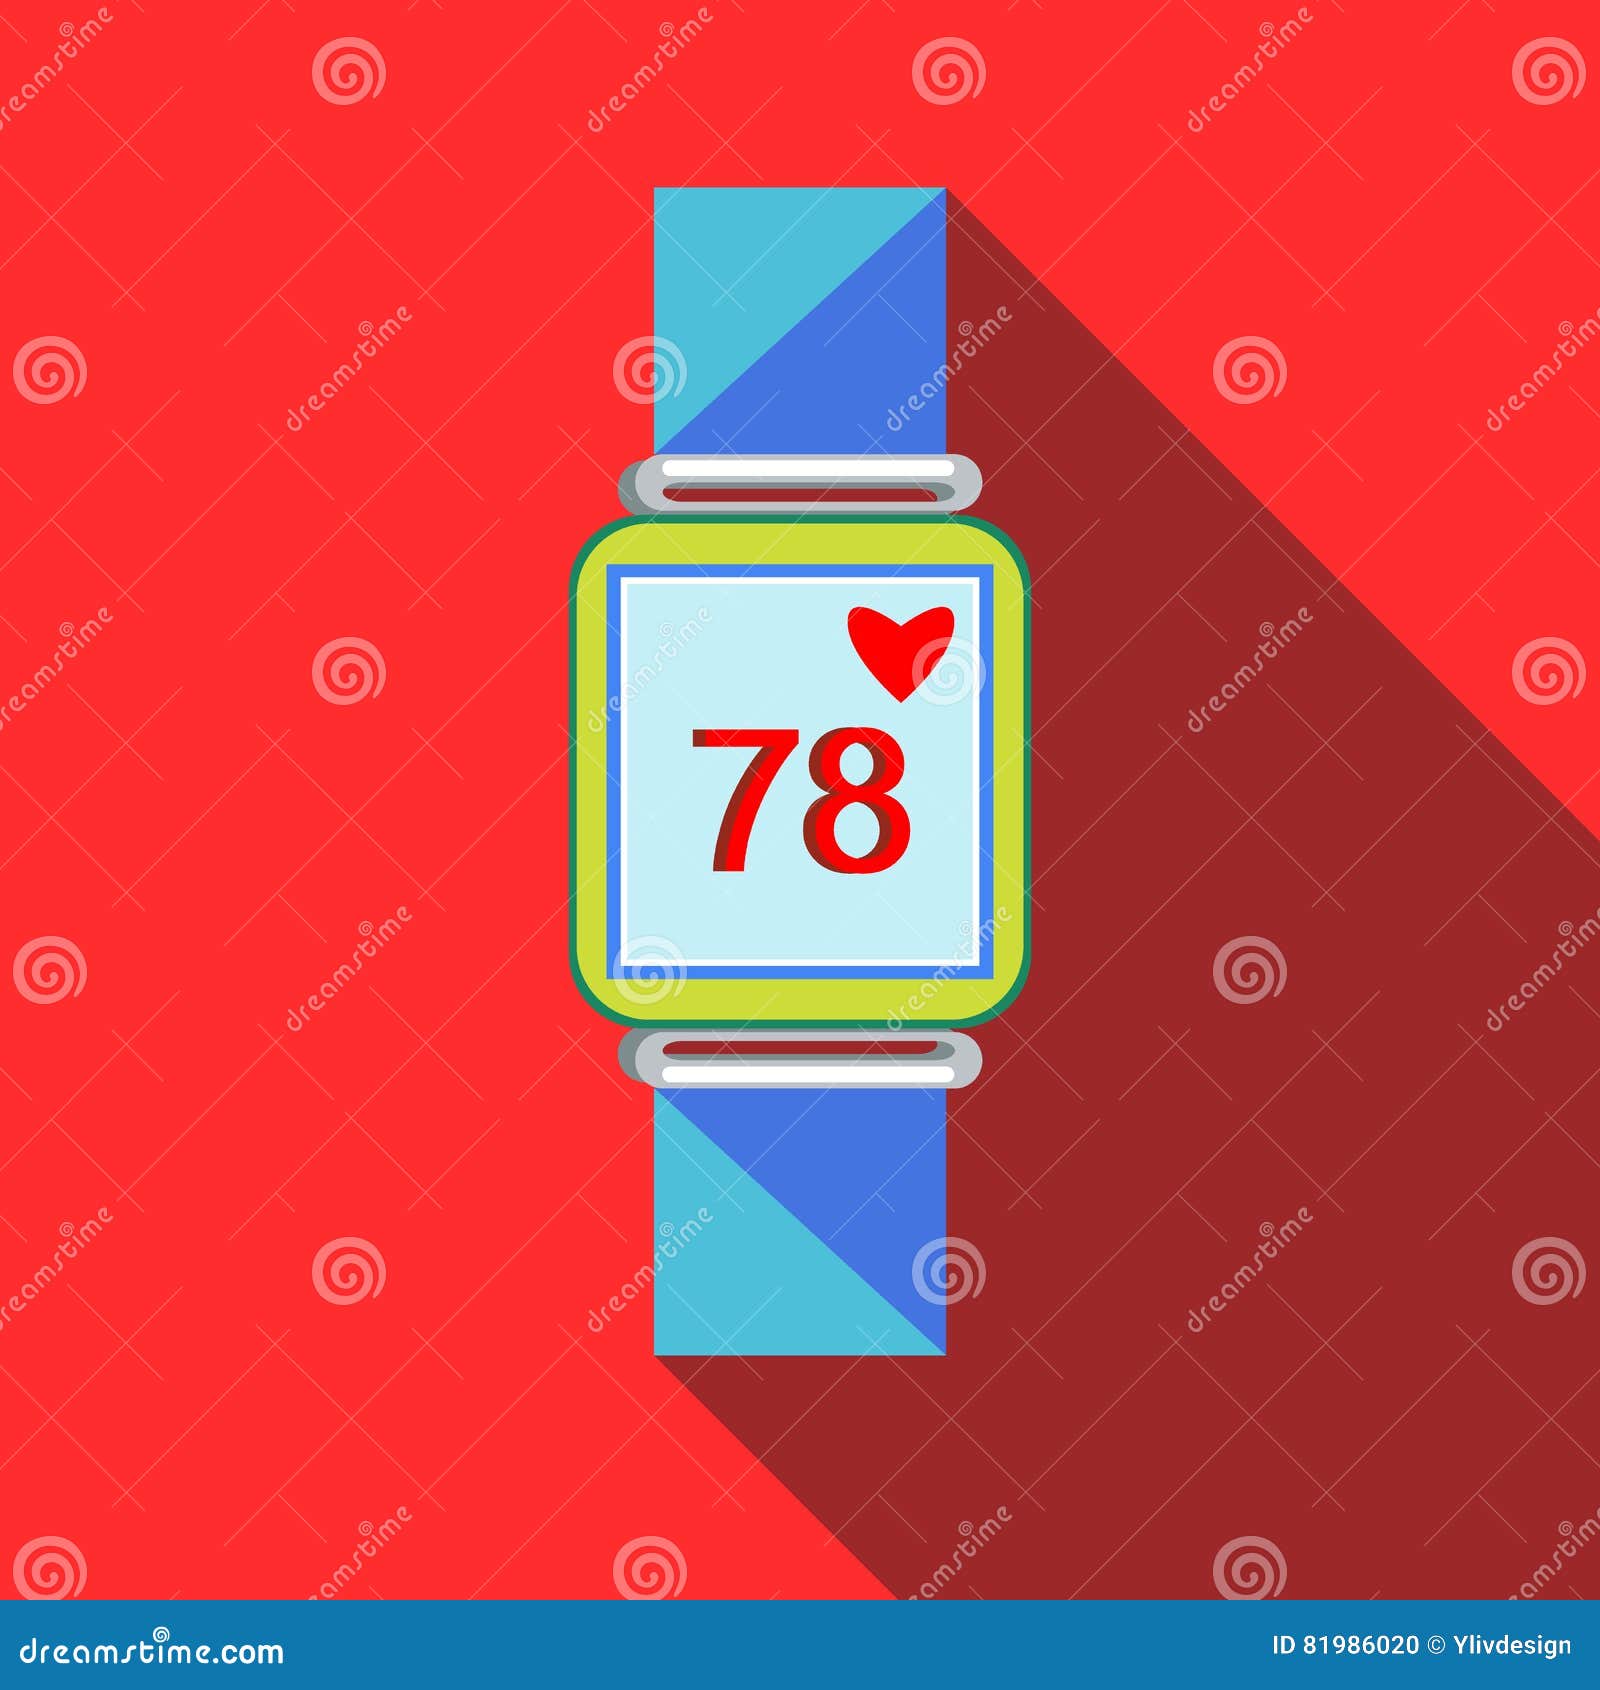 pulsometer heart rate watch icon, flat style